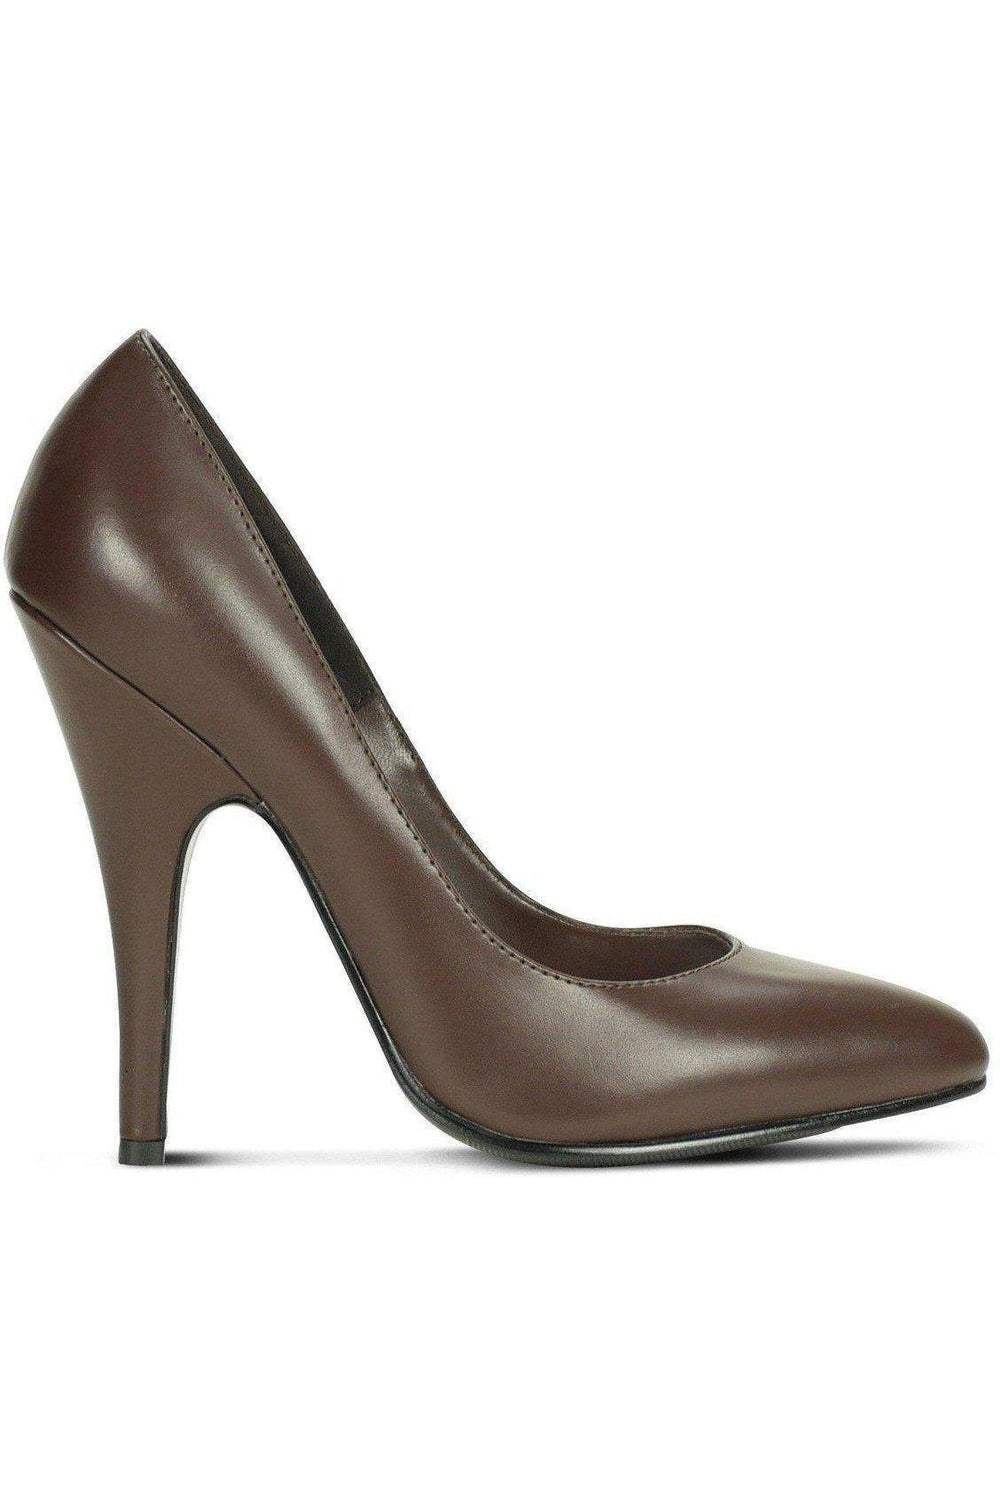 Sexy-4211 Vintage High Heel Pump | Brown Faux Leather-Sexyshoes Brand-Pumps-SEXYSHOES.COM